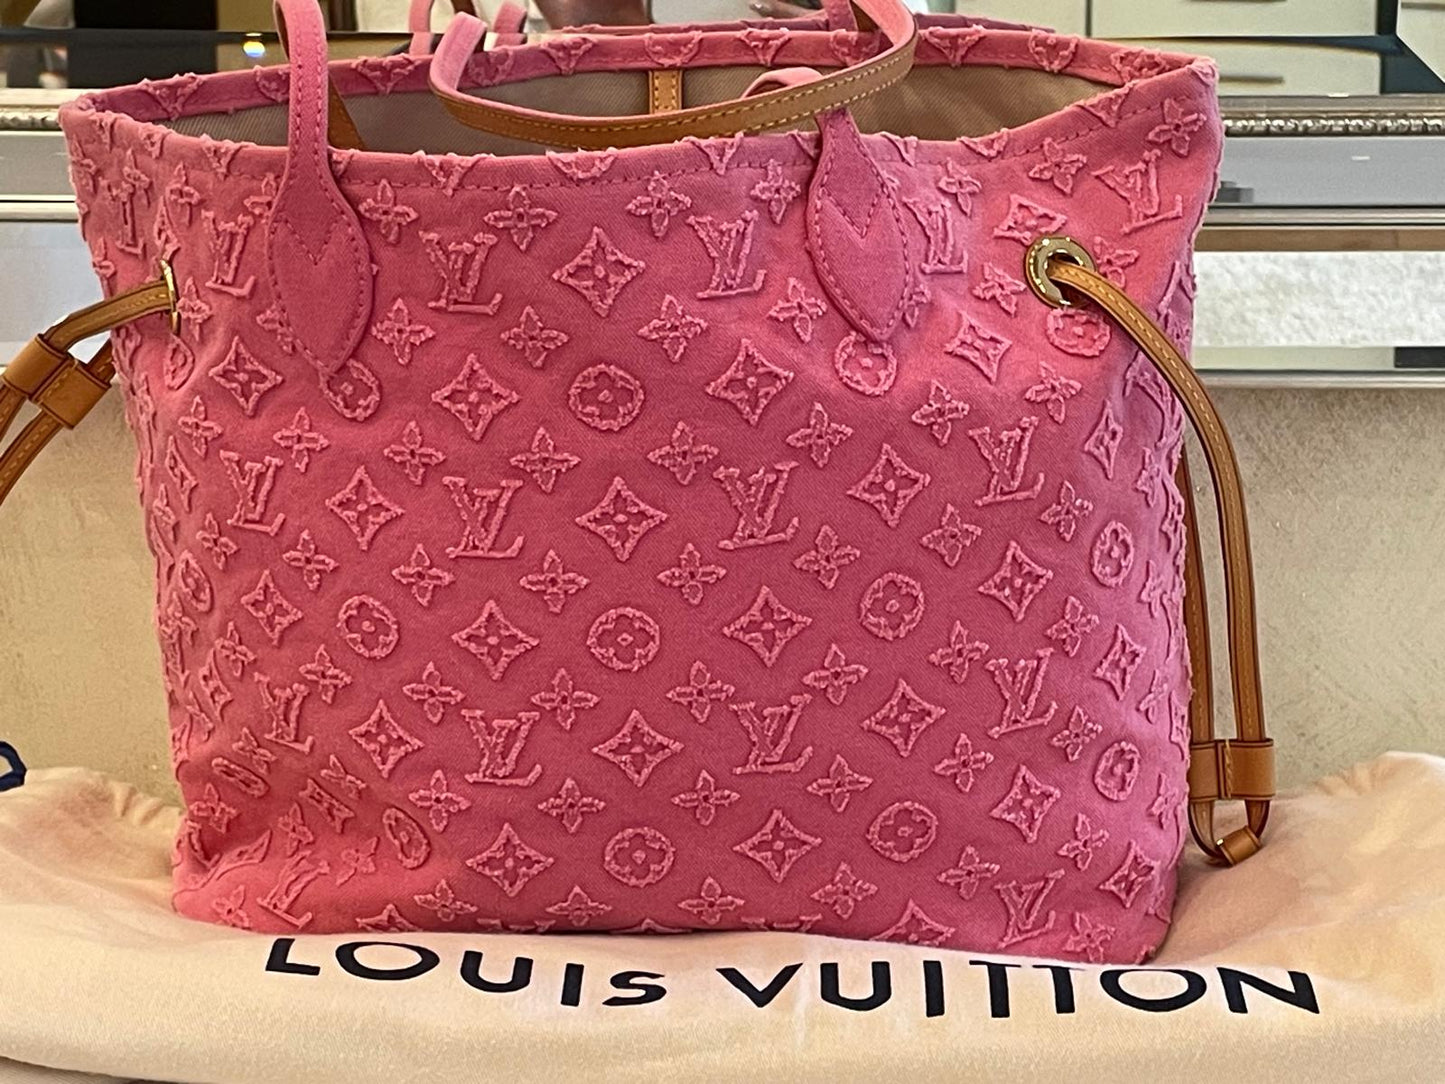 Louis Vuitton - Neverfull Limited Edition Rosa Denim Collection Croisiere 2013